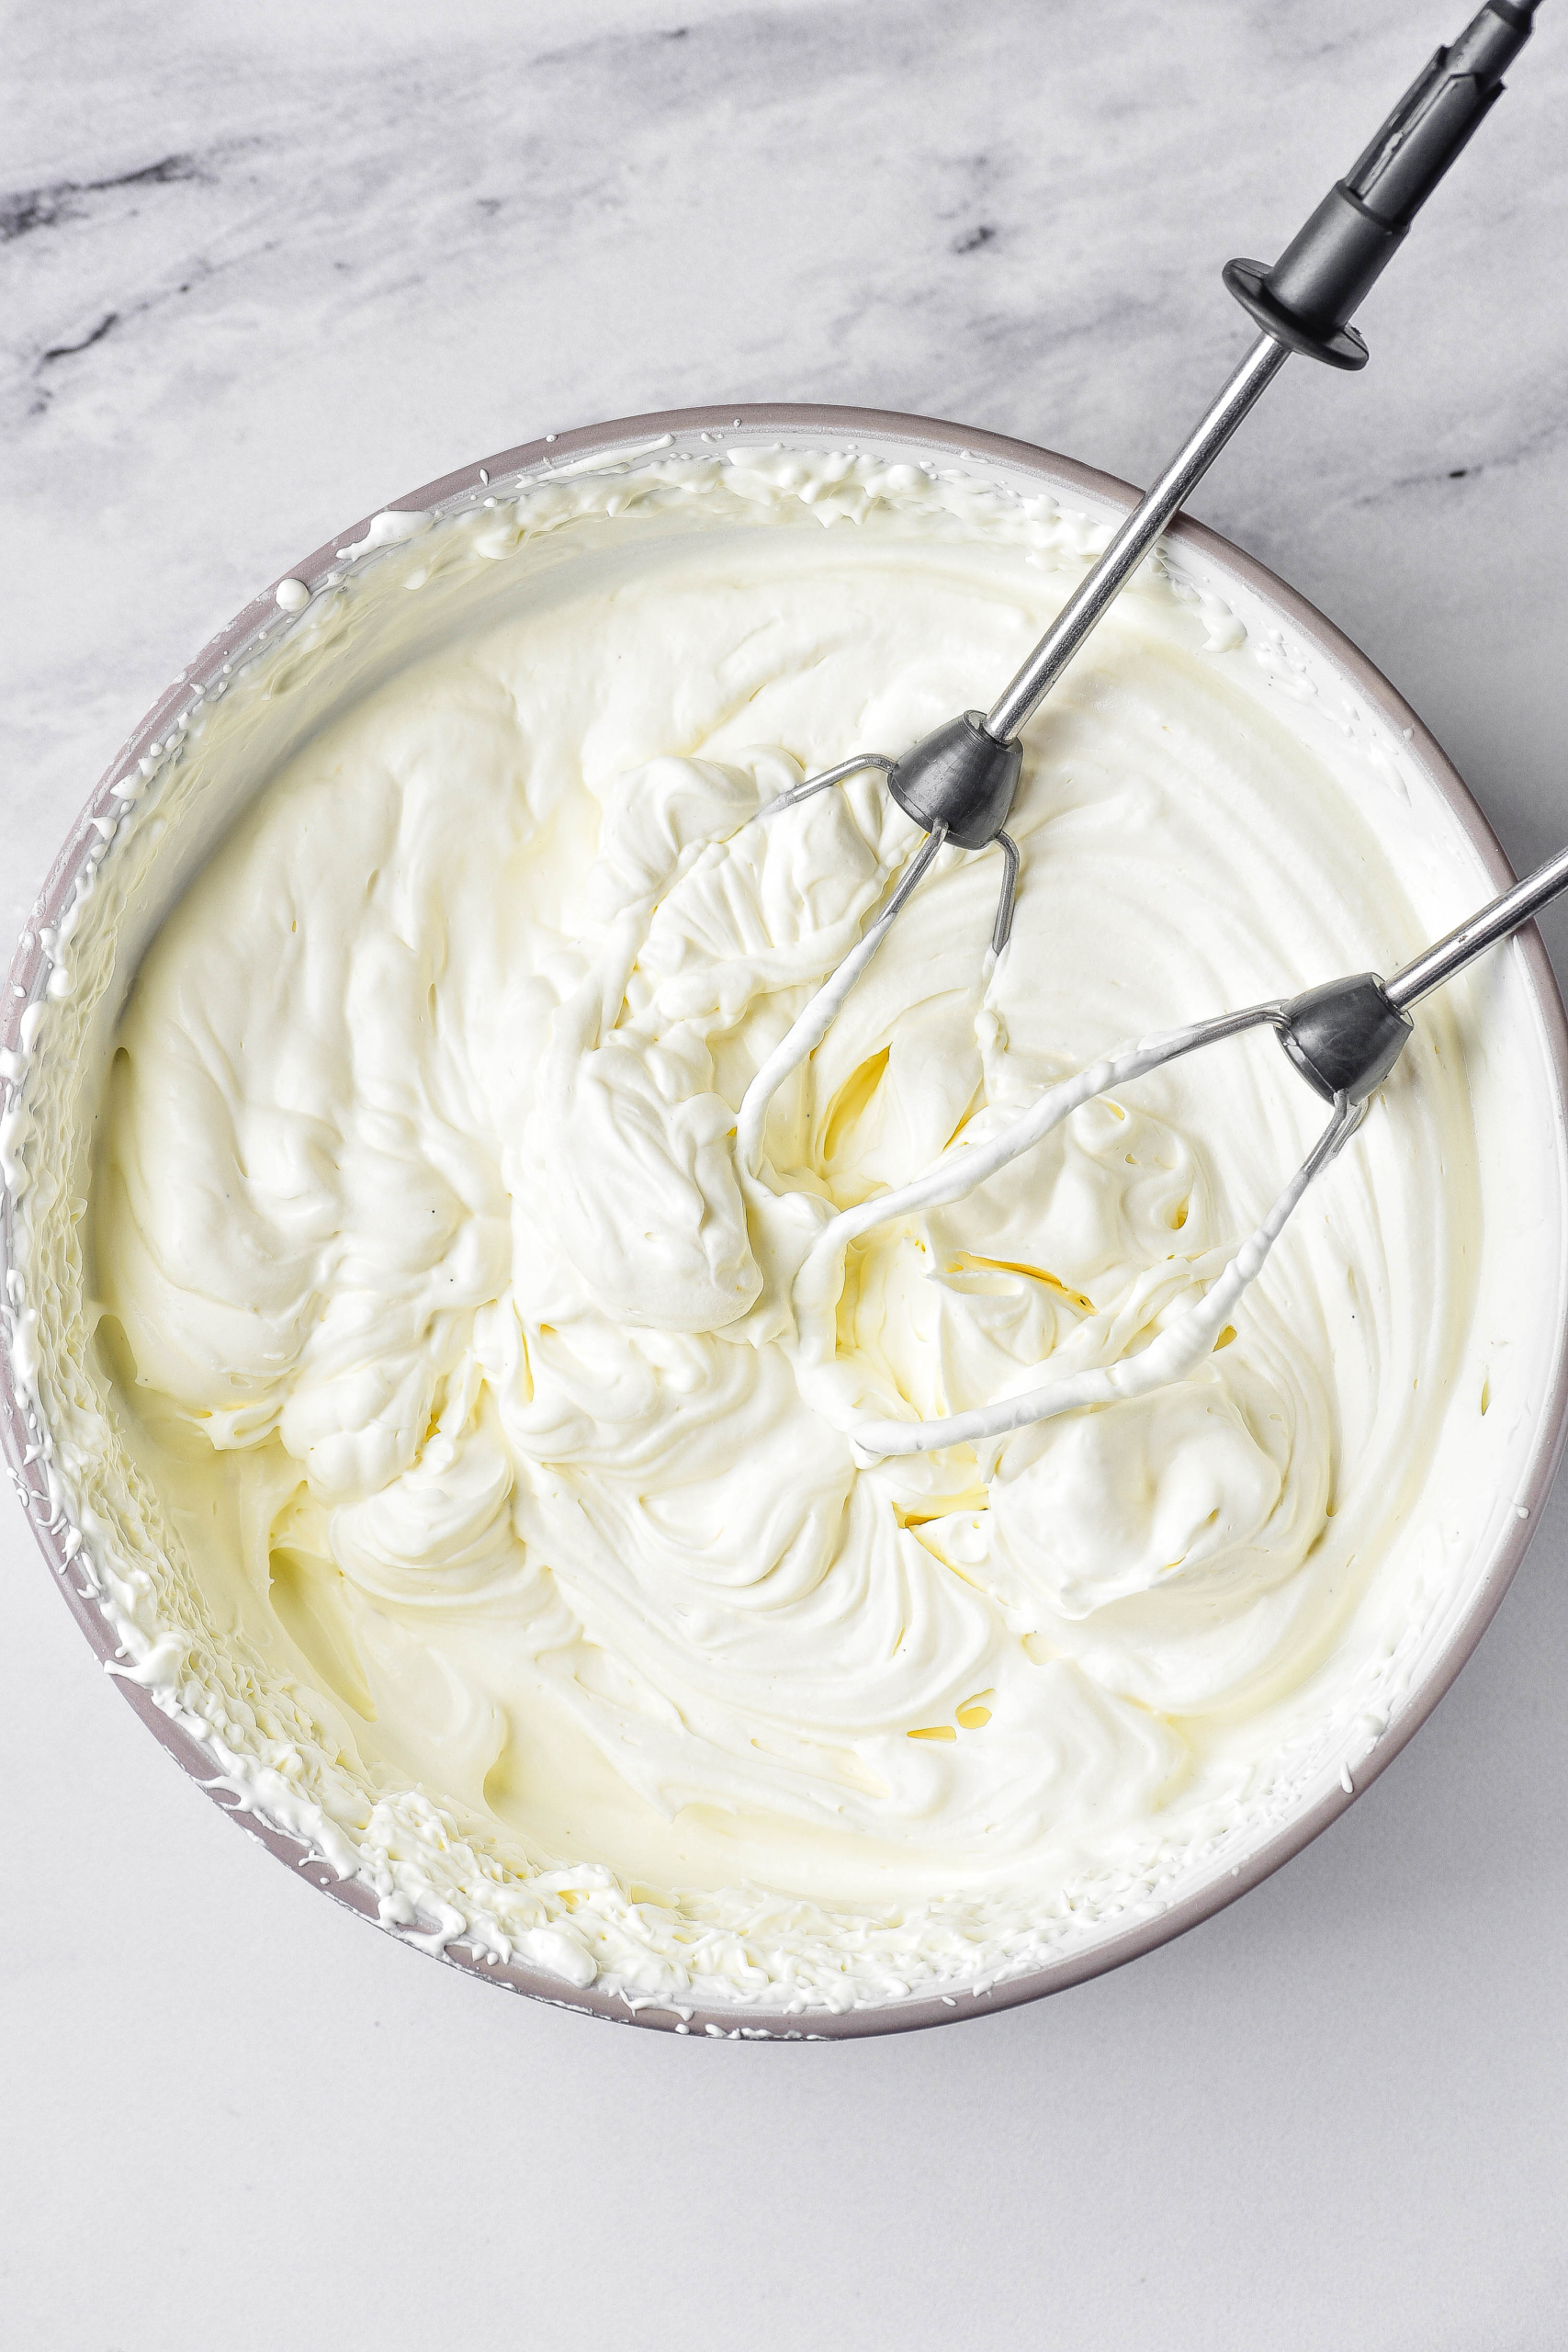 Whipped cream with beaters in bowl.